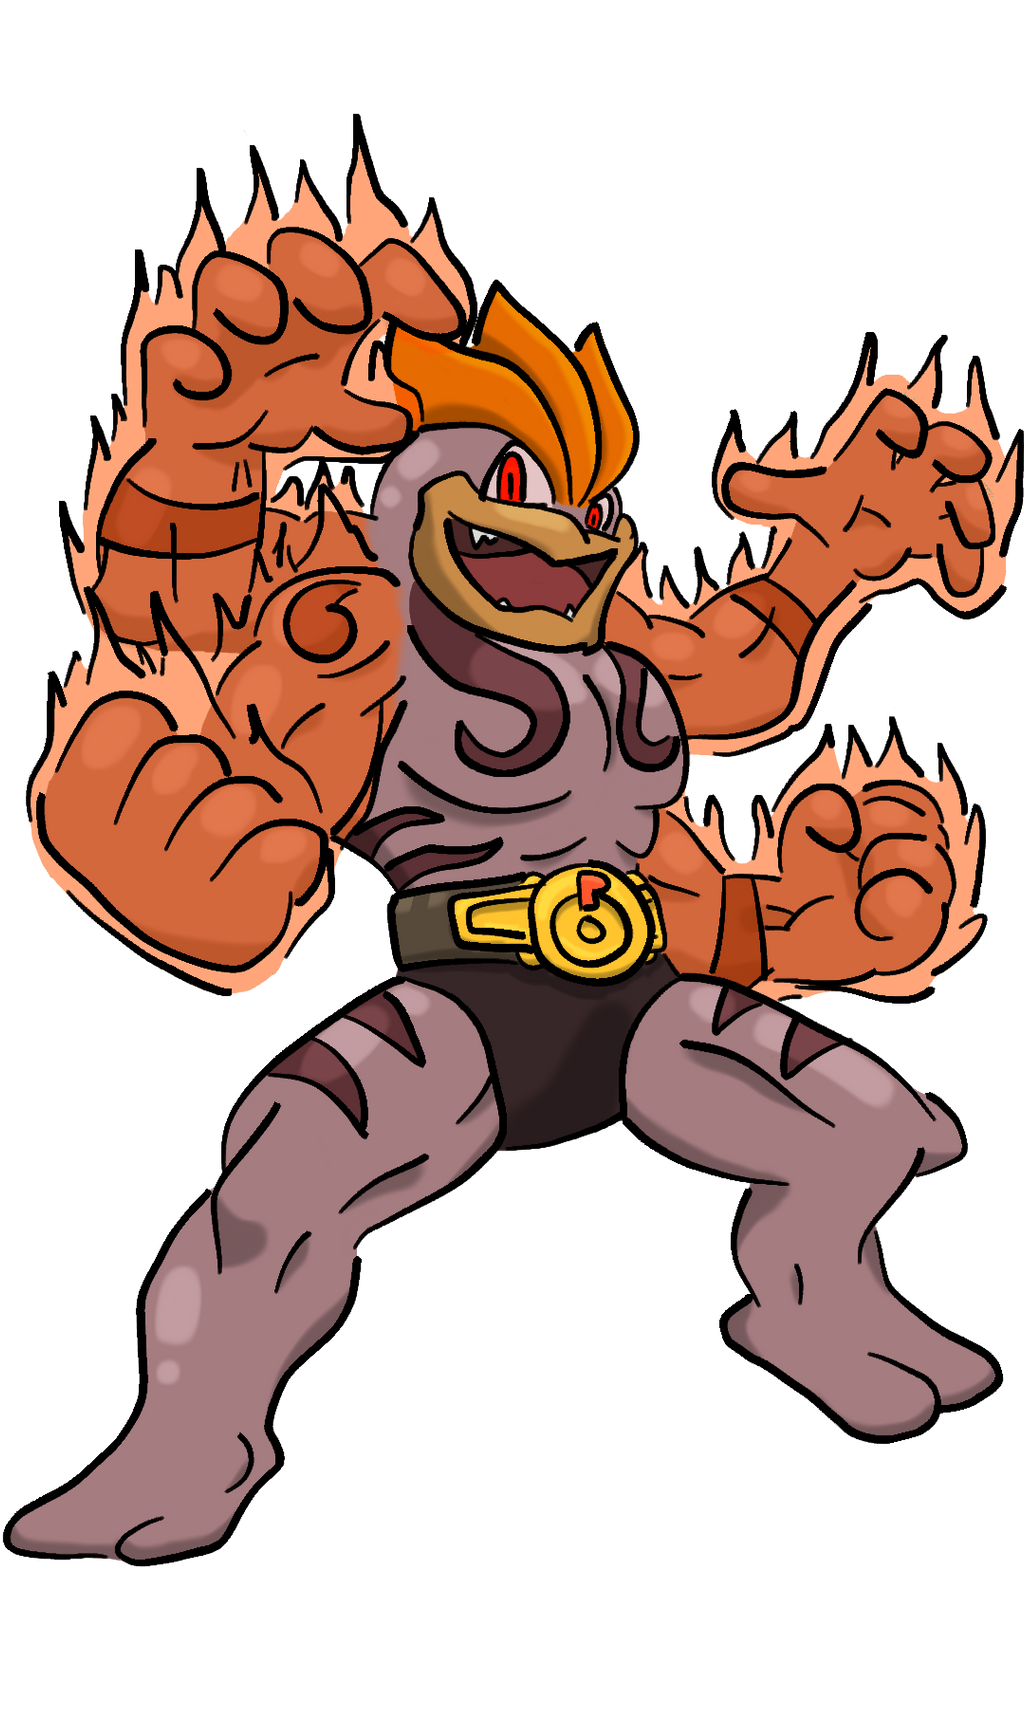 Type Machamp by on